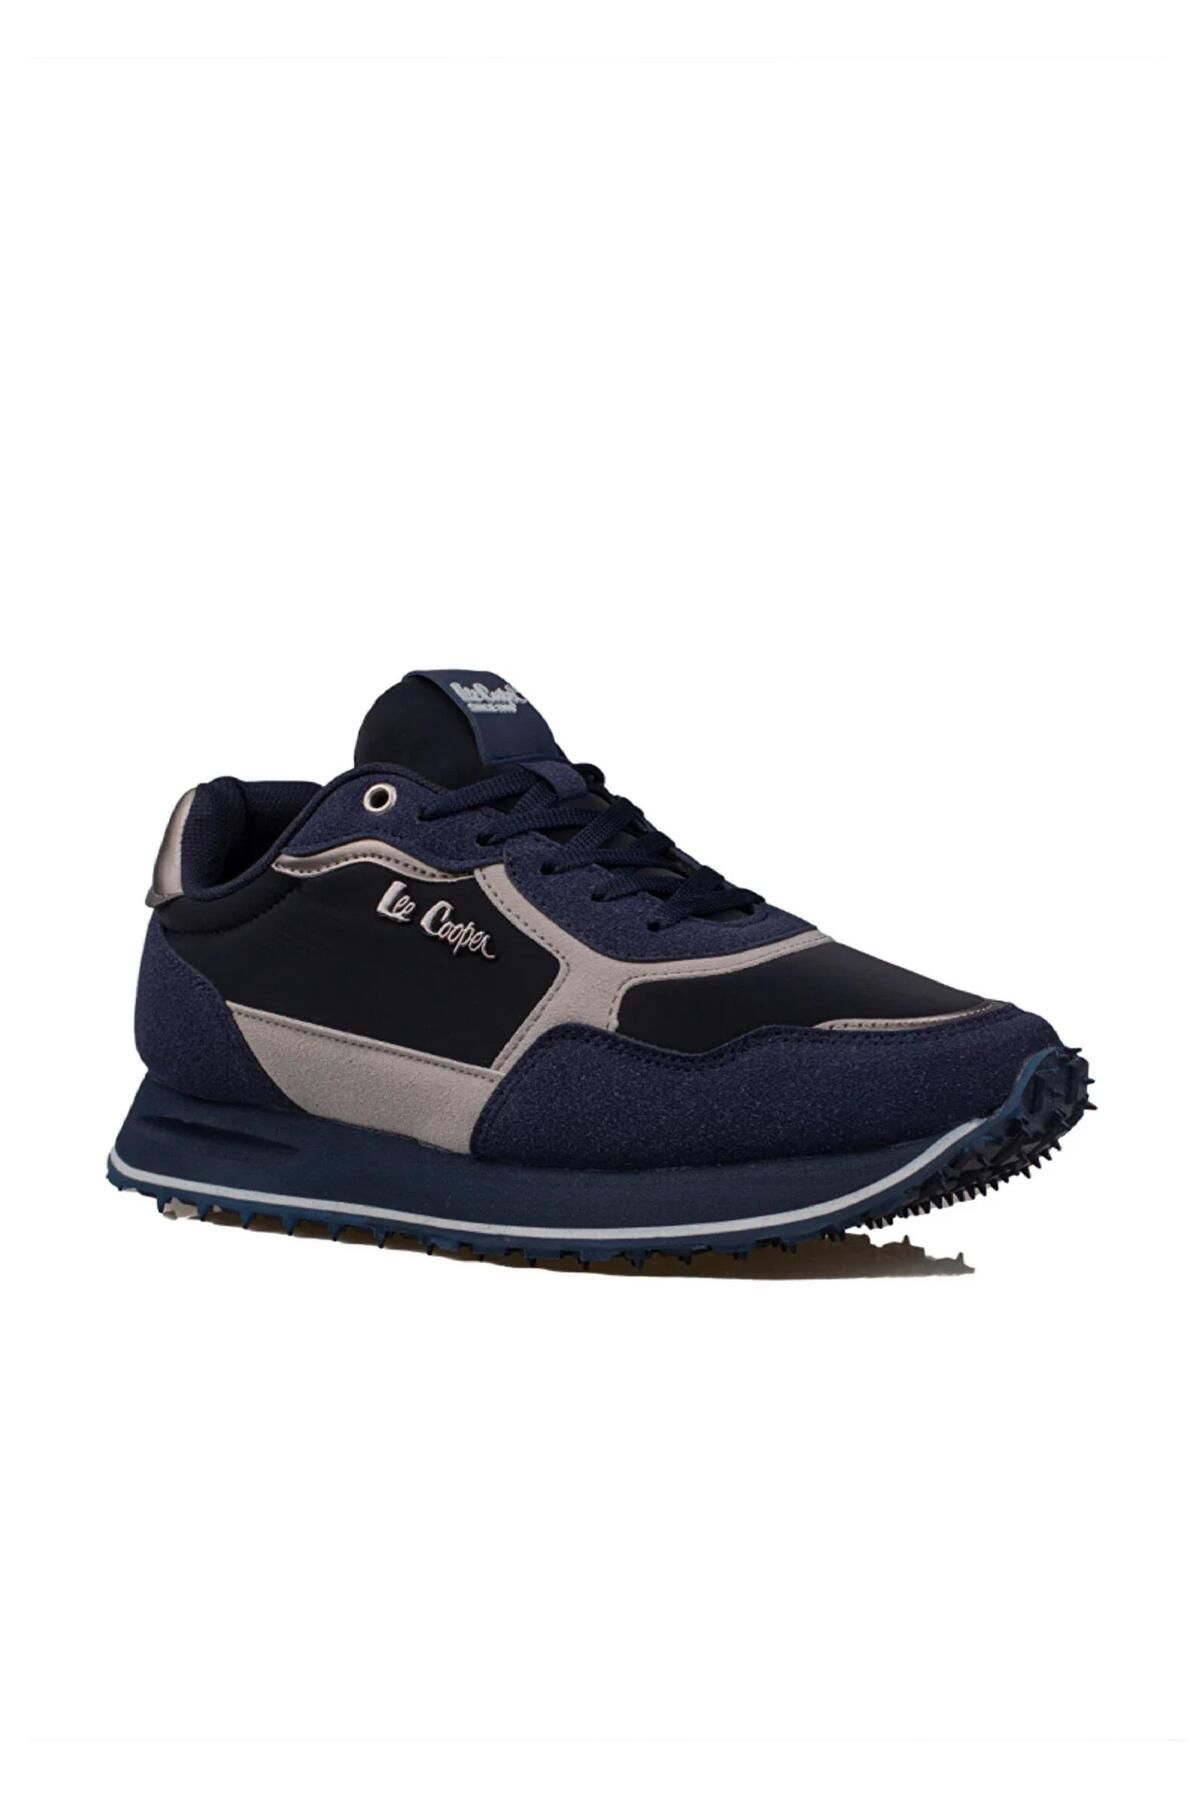 Lee Cooper Lee Copper LC-31214 Navy Blue Sneakers مردان